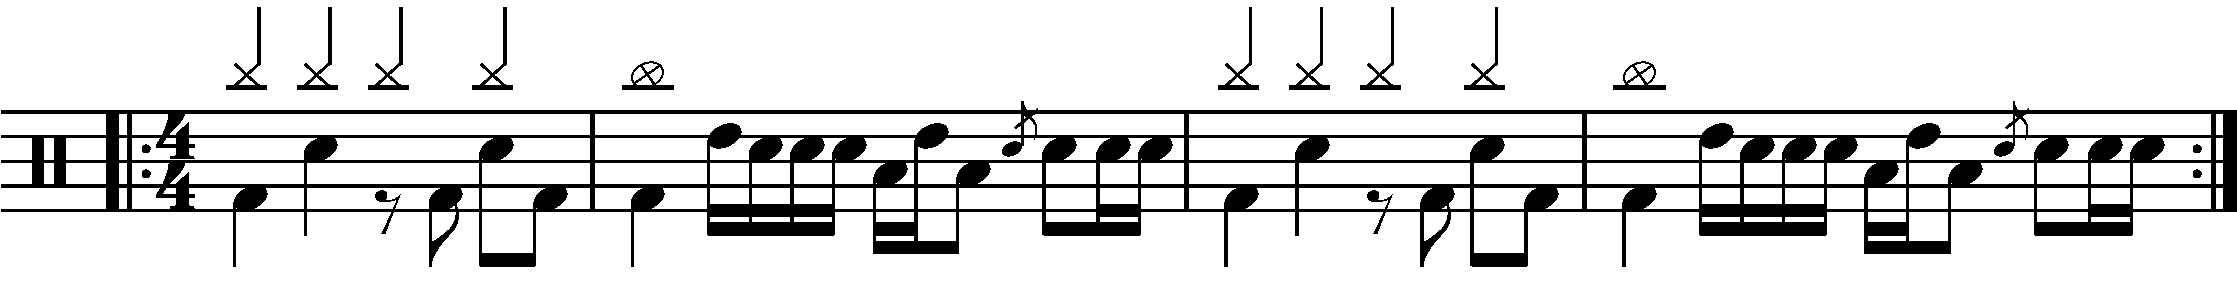 A repeated two bar phrase using simple rhythmic fills.